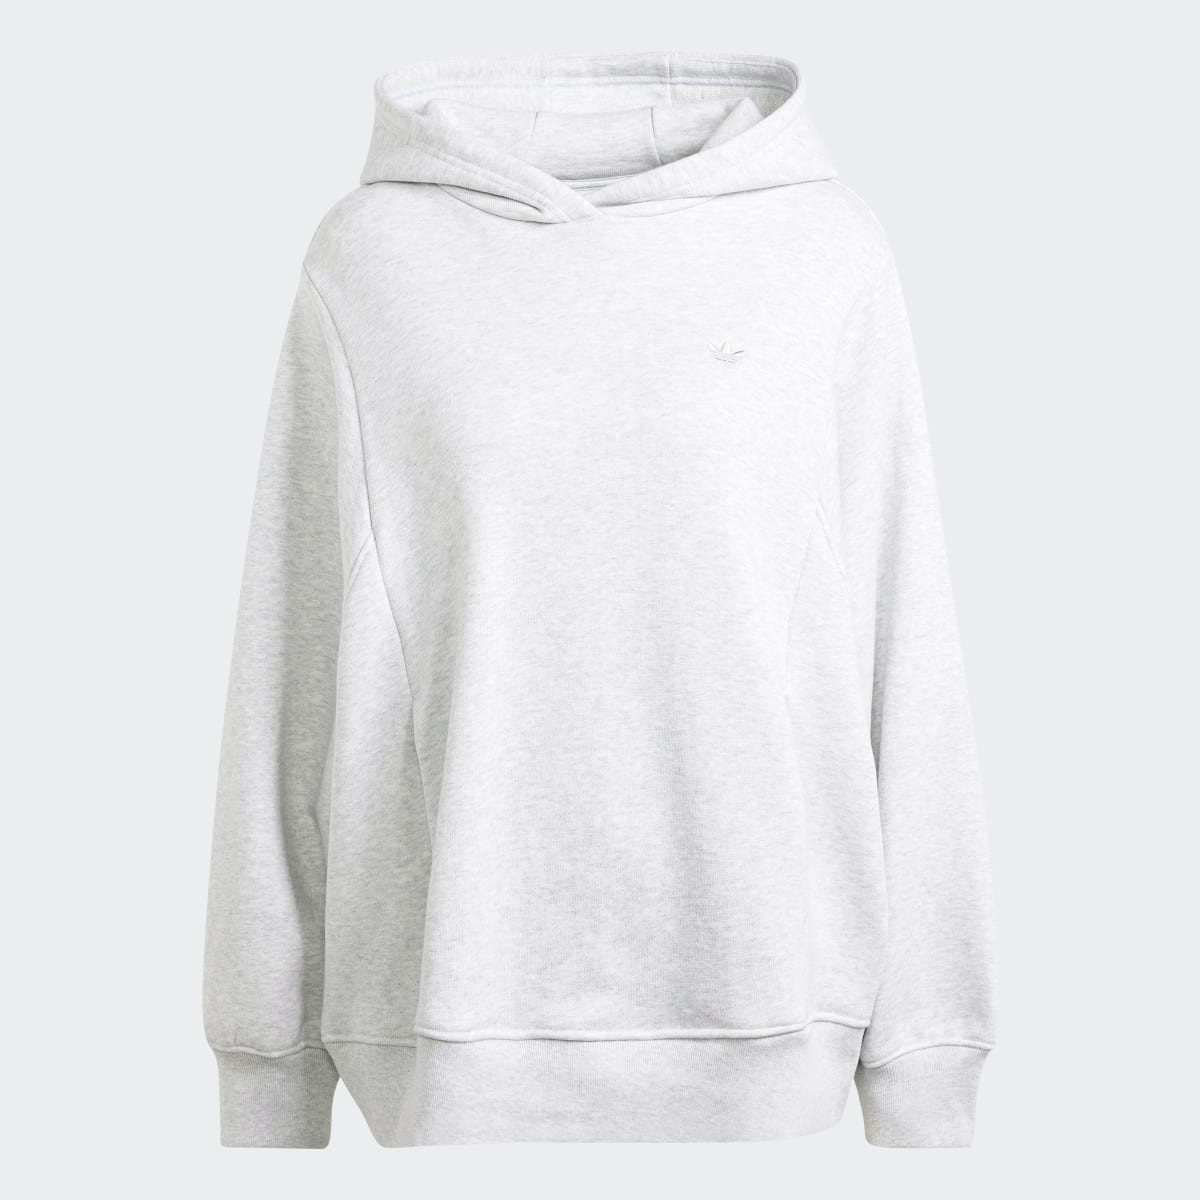 Adidas Hoodie Premium Essentials Made To Be Remade Oversized. 5